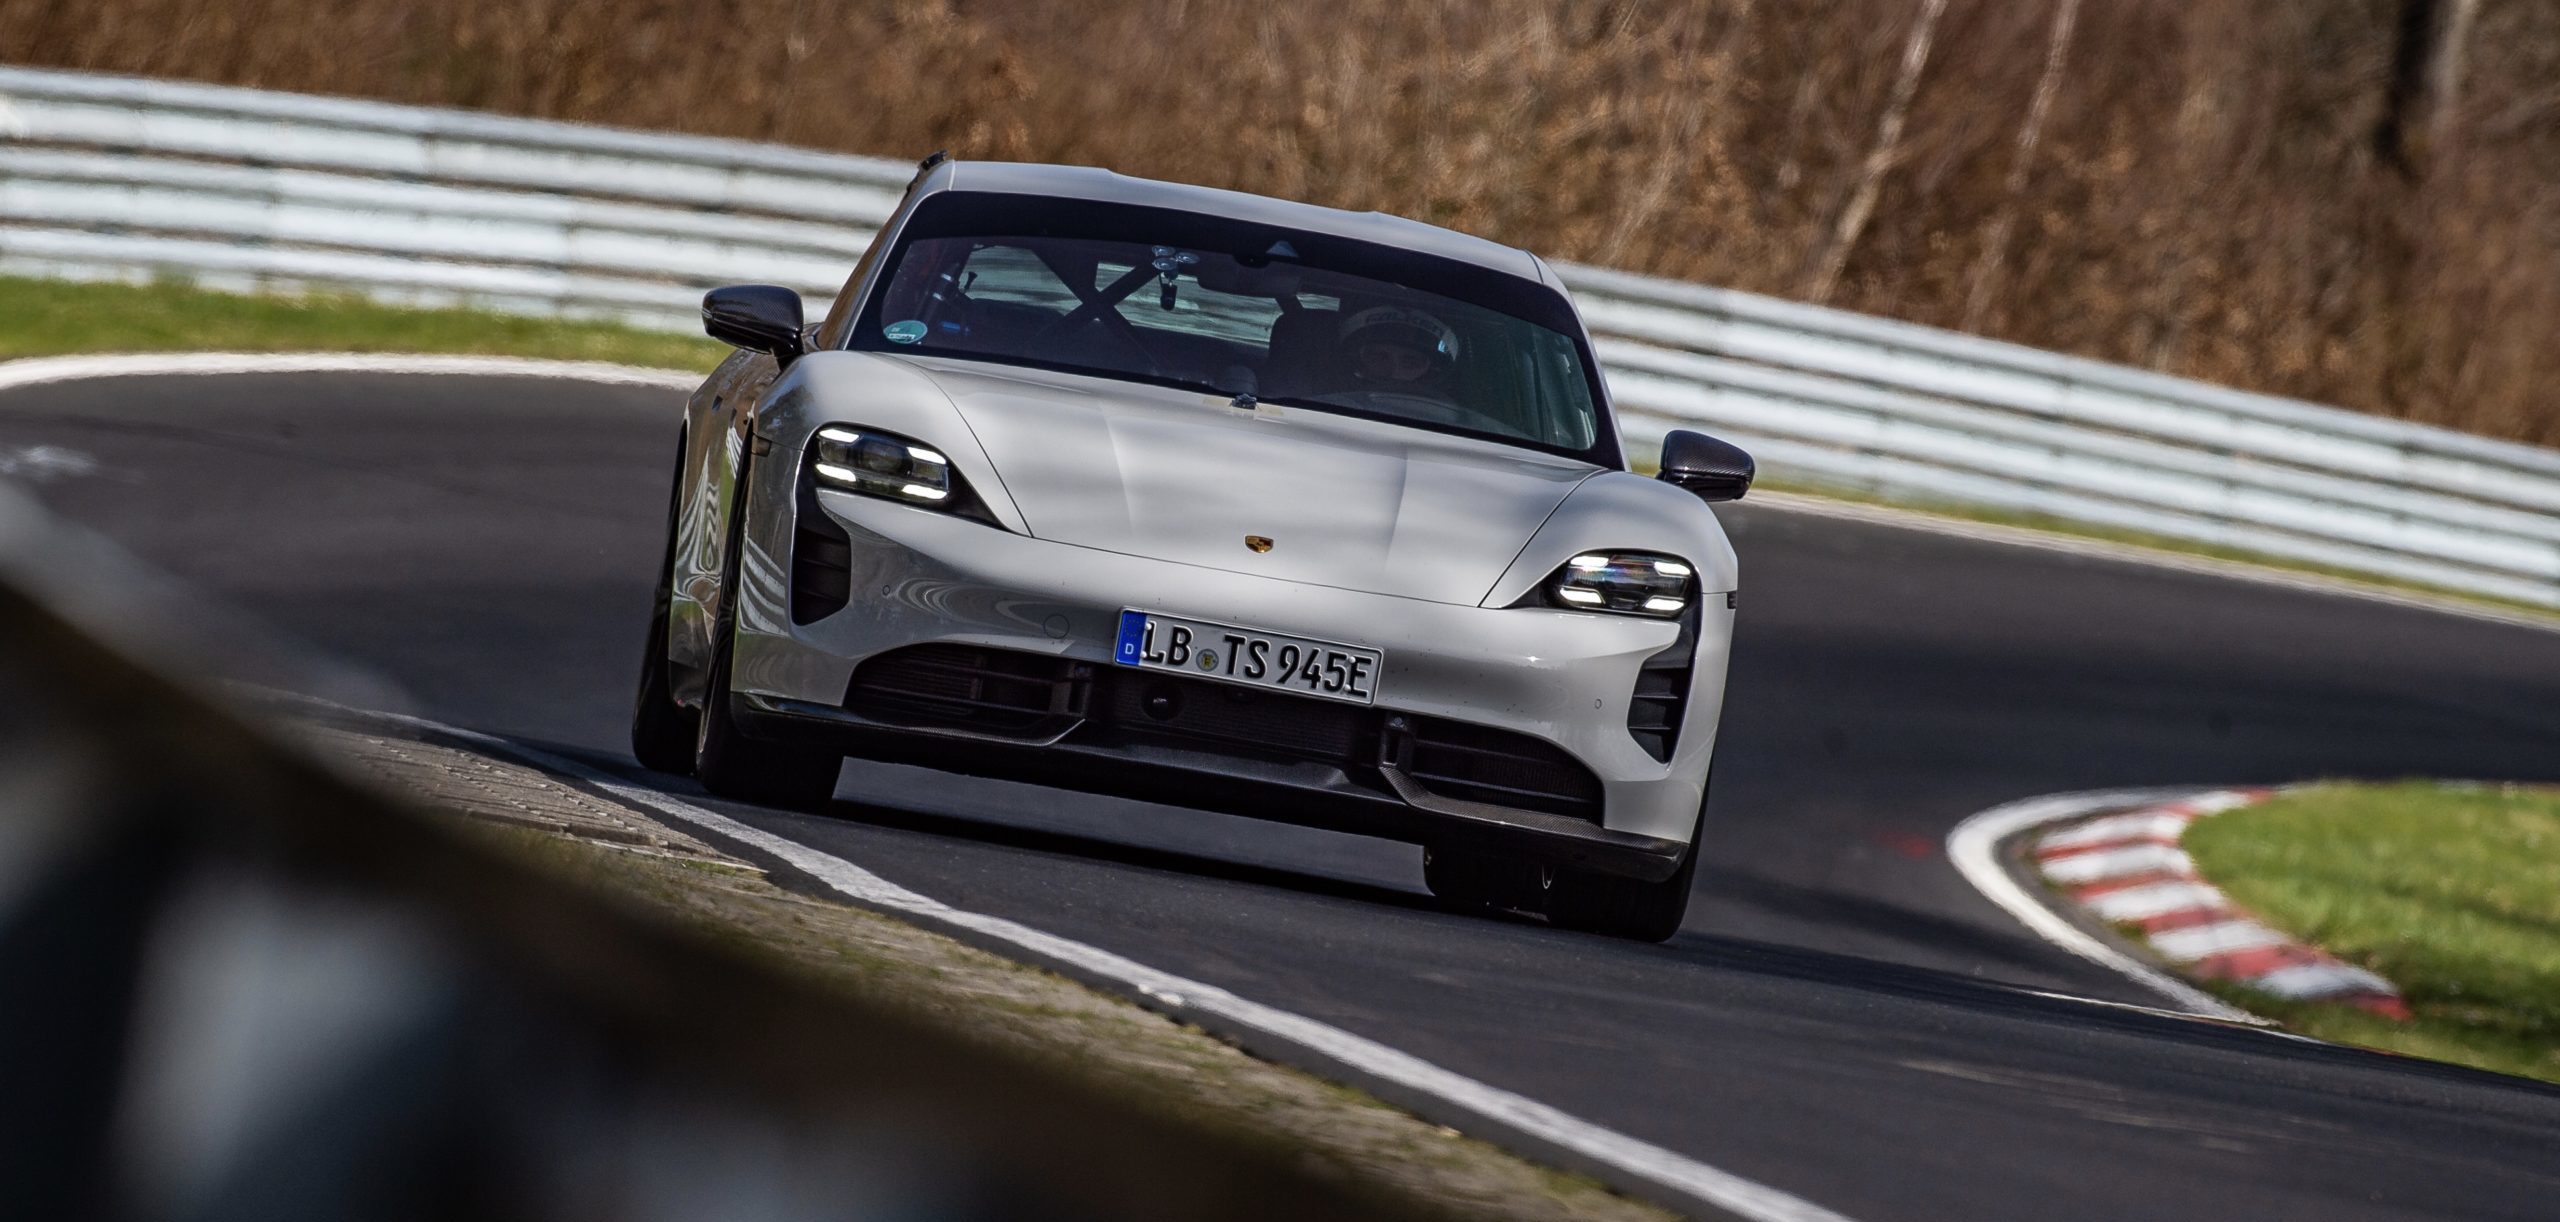 Porsche Taycan Turbo S setting a lap record for EVs at the Nürburgring in Germany